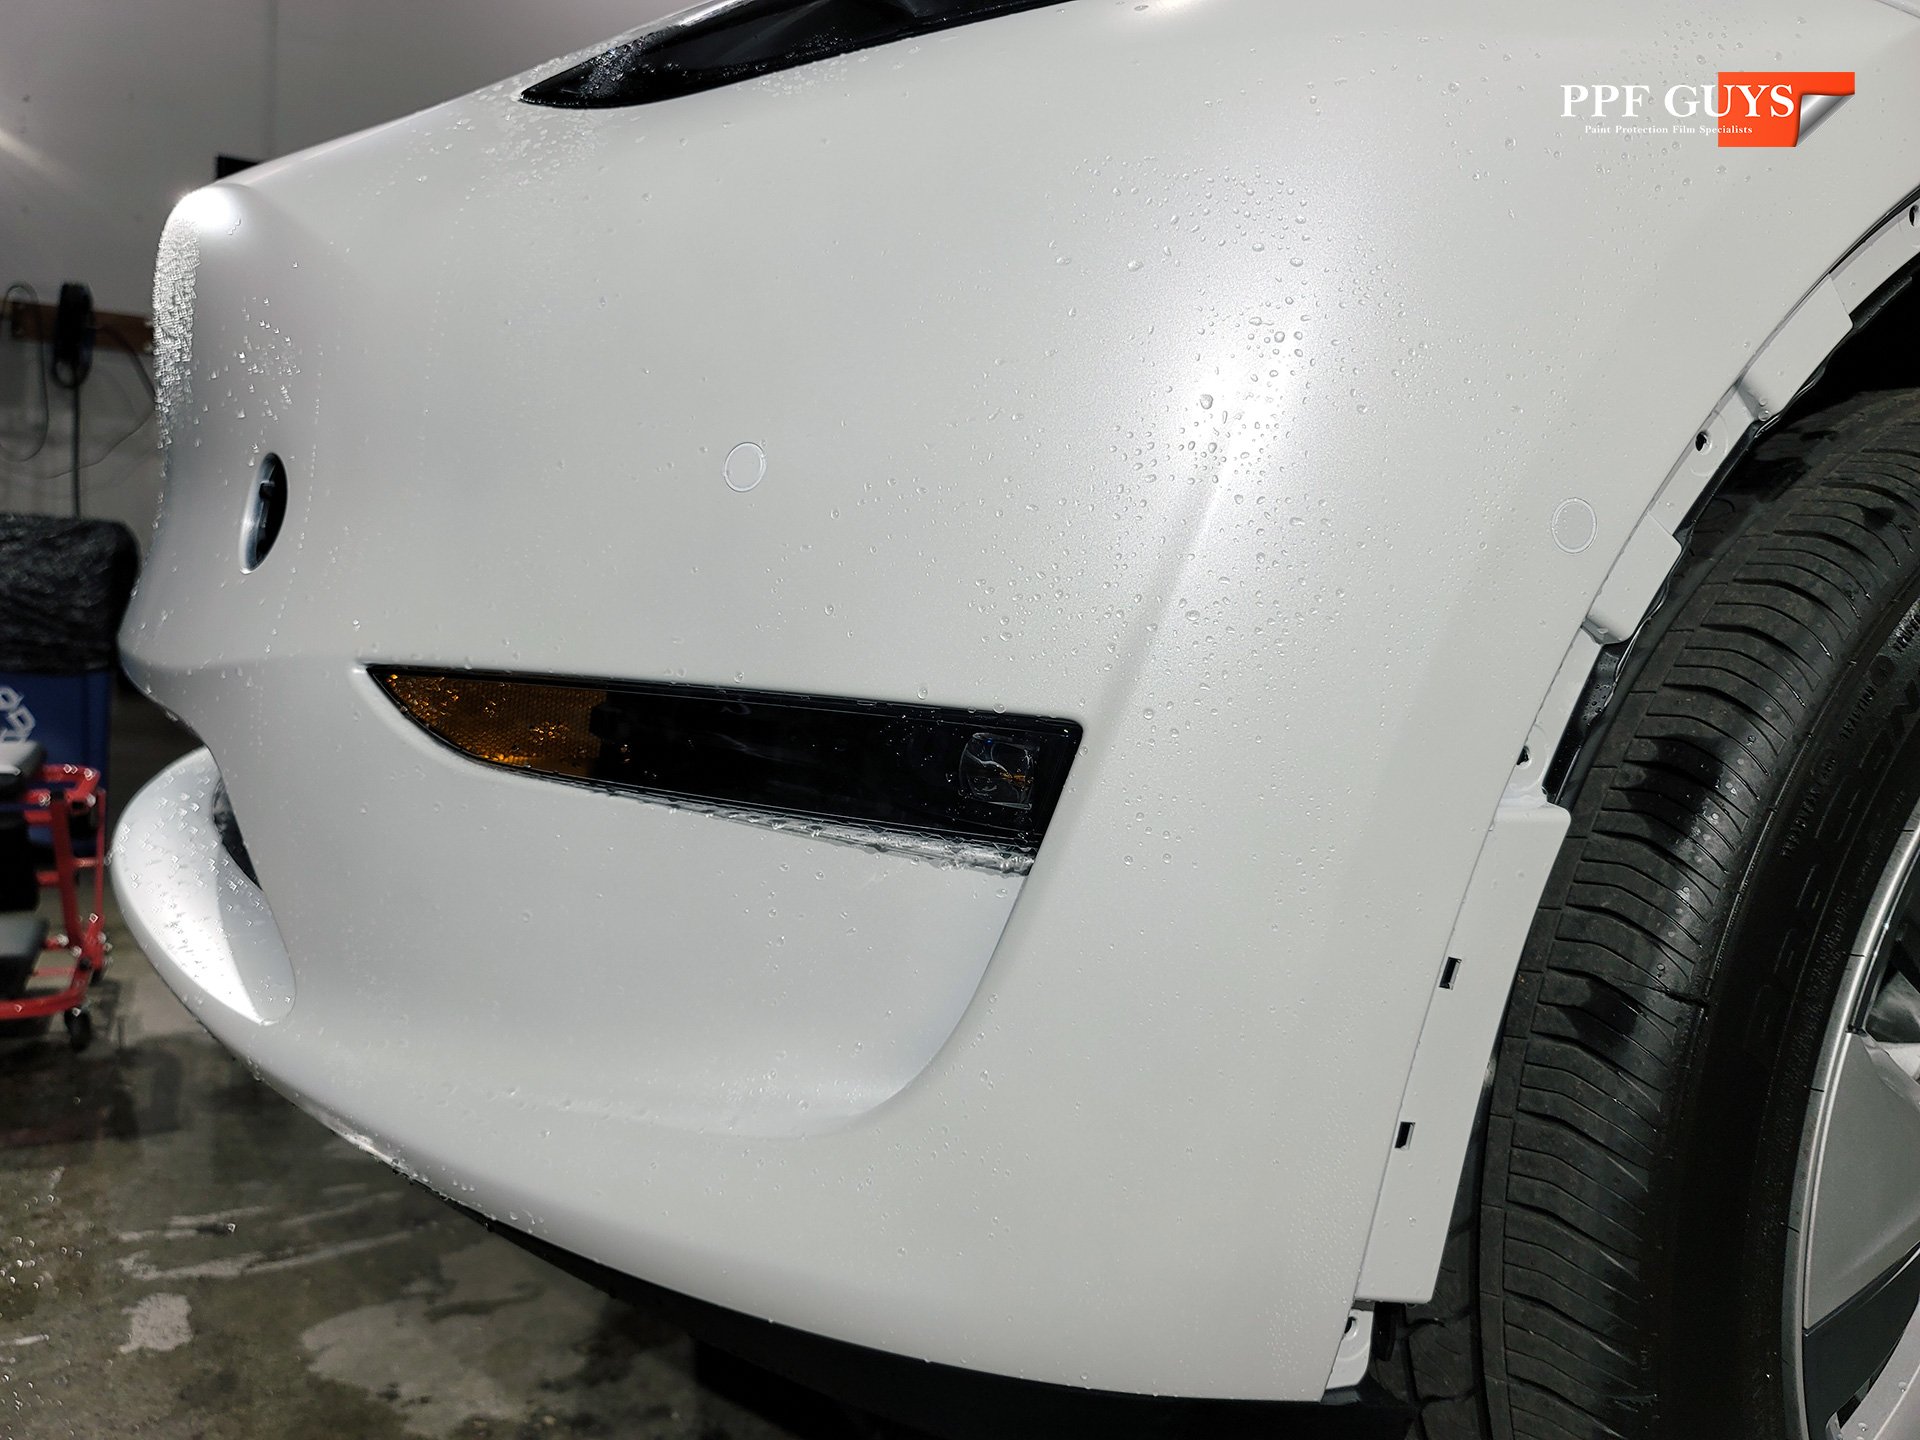 PPF Guys Model Y White Xpel Stealth, ceramic, painted emblems (7).jpg